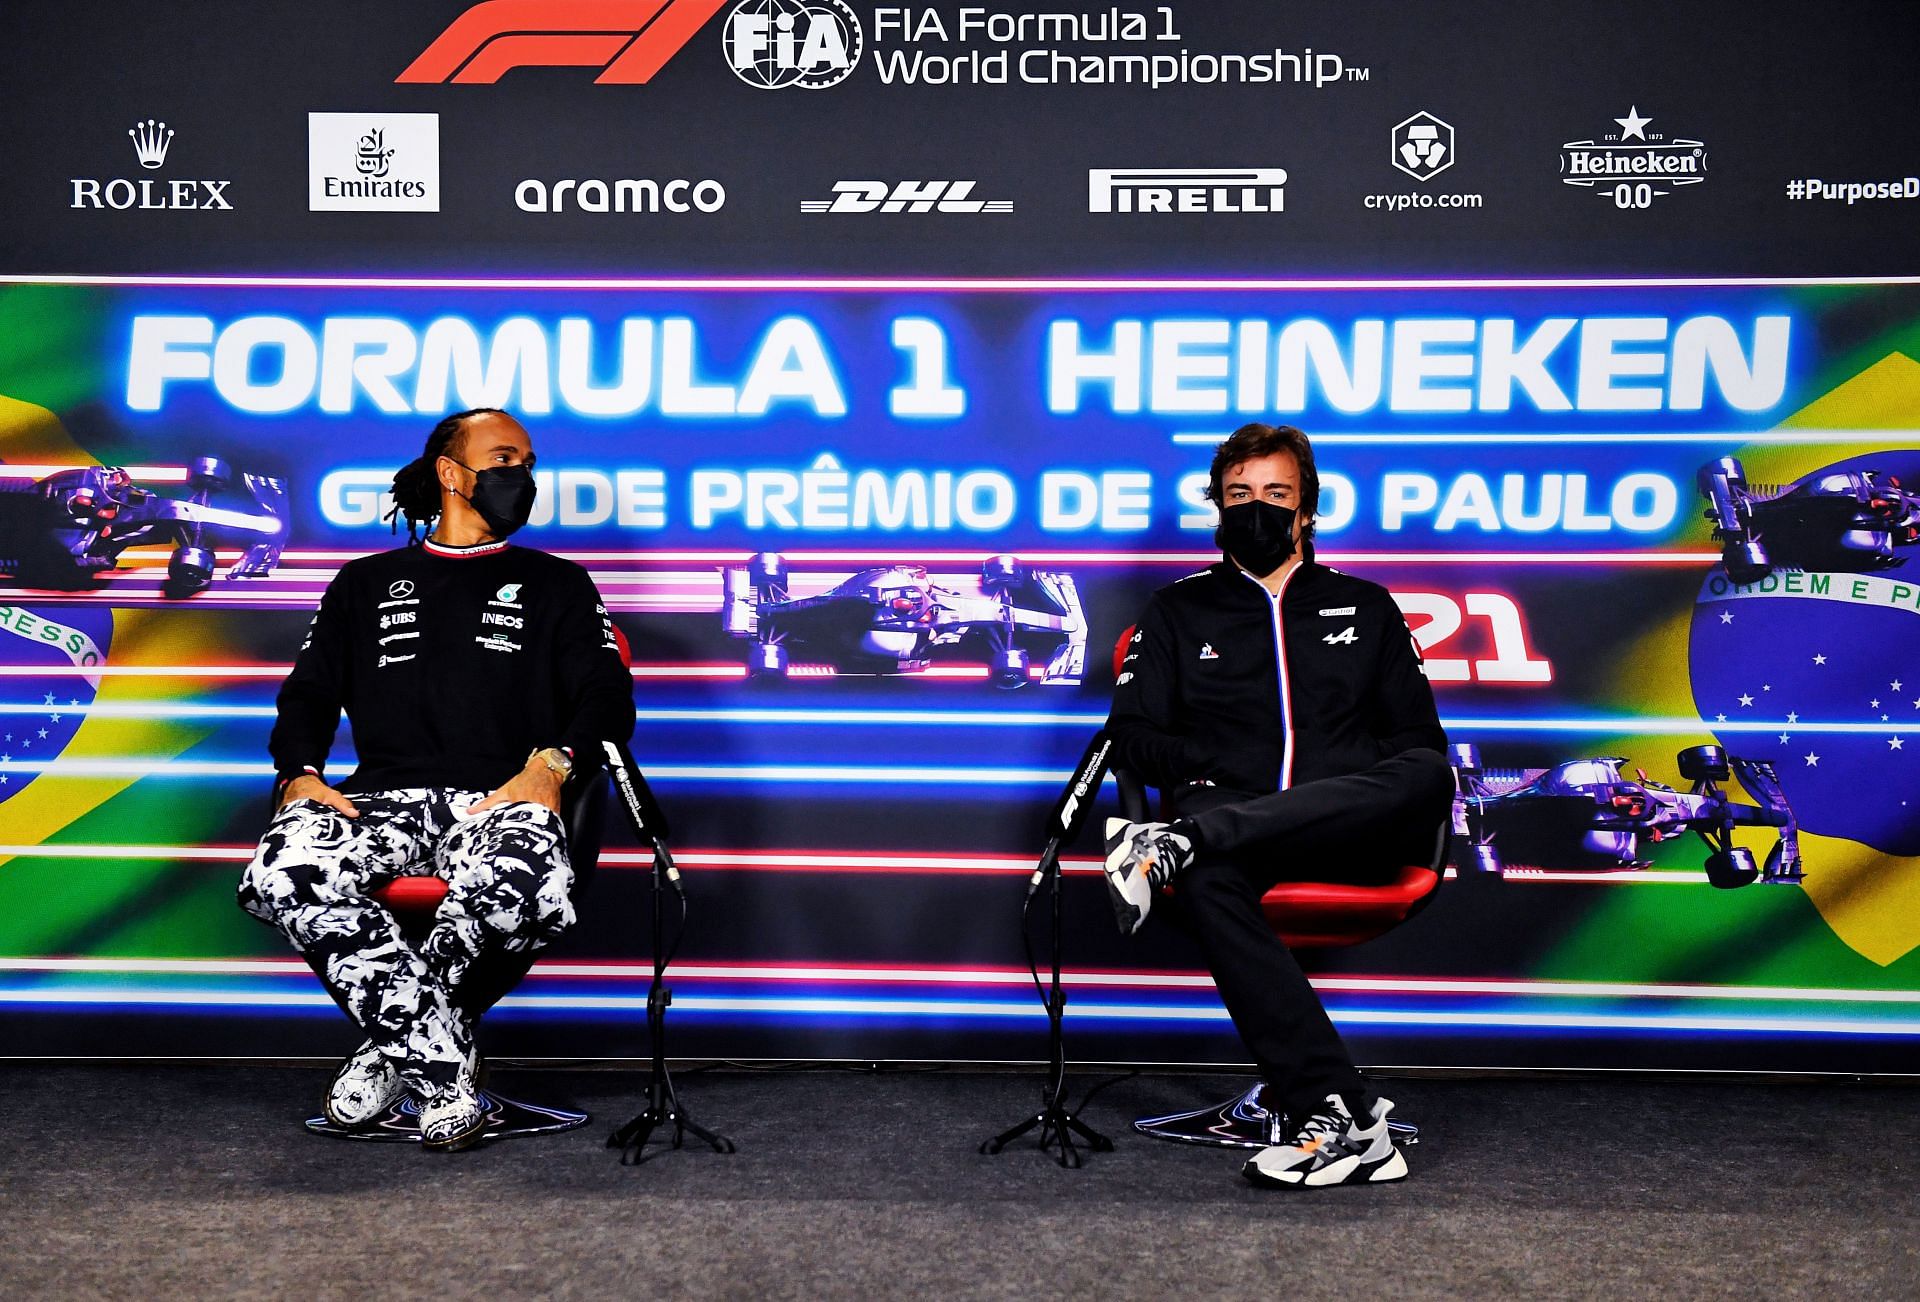 Lewis Hamilton (left) and Fernando Alonso (right) (Photo by Rudy Carezzevoli - Pool/Getty Images)